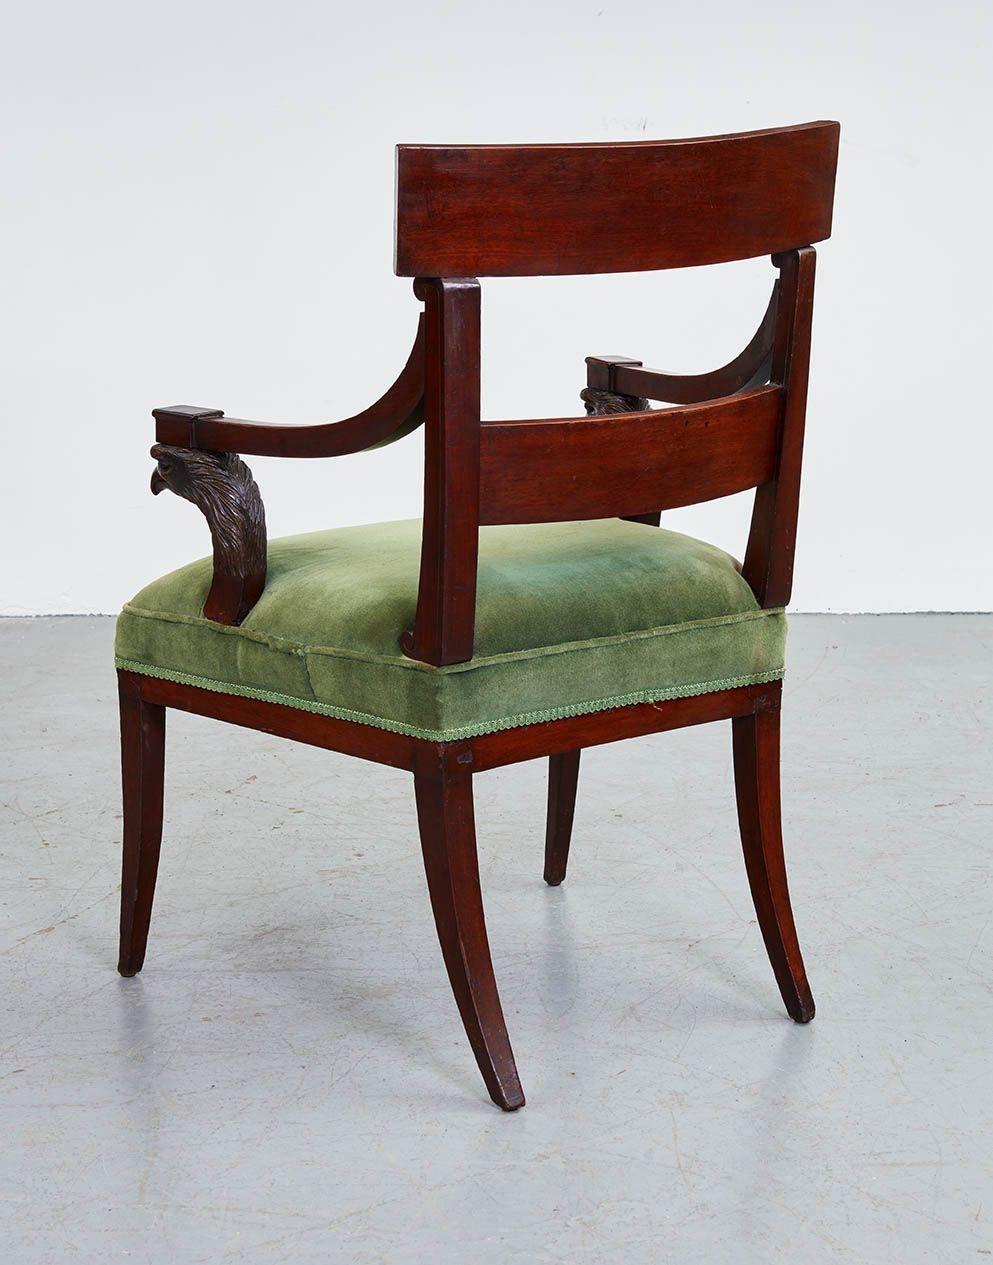 Early 19th Century Northern European Neoclassical Armchair For Sale